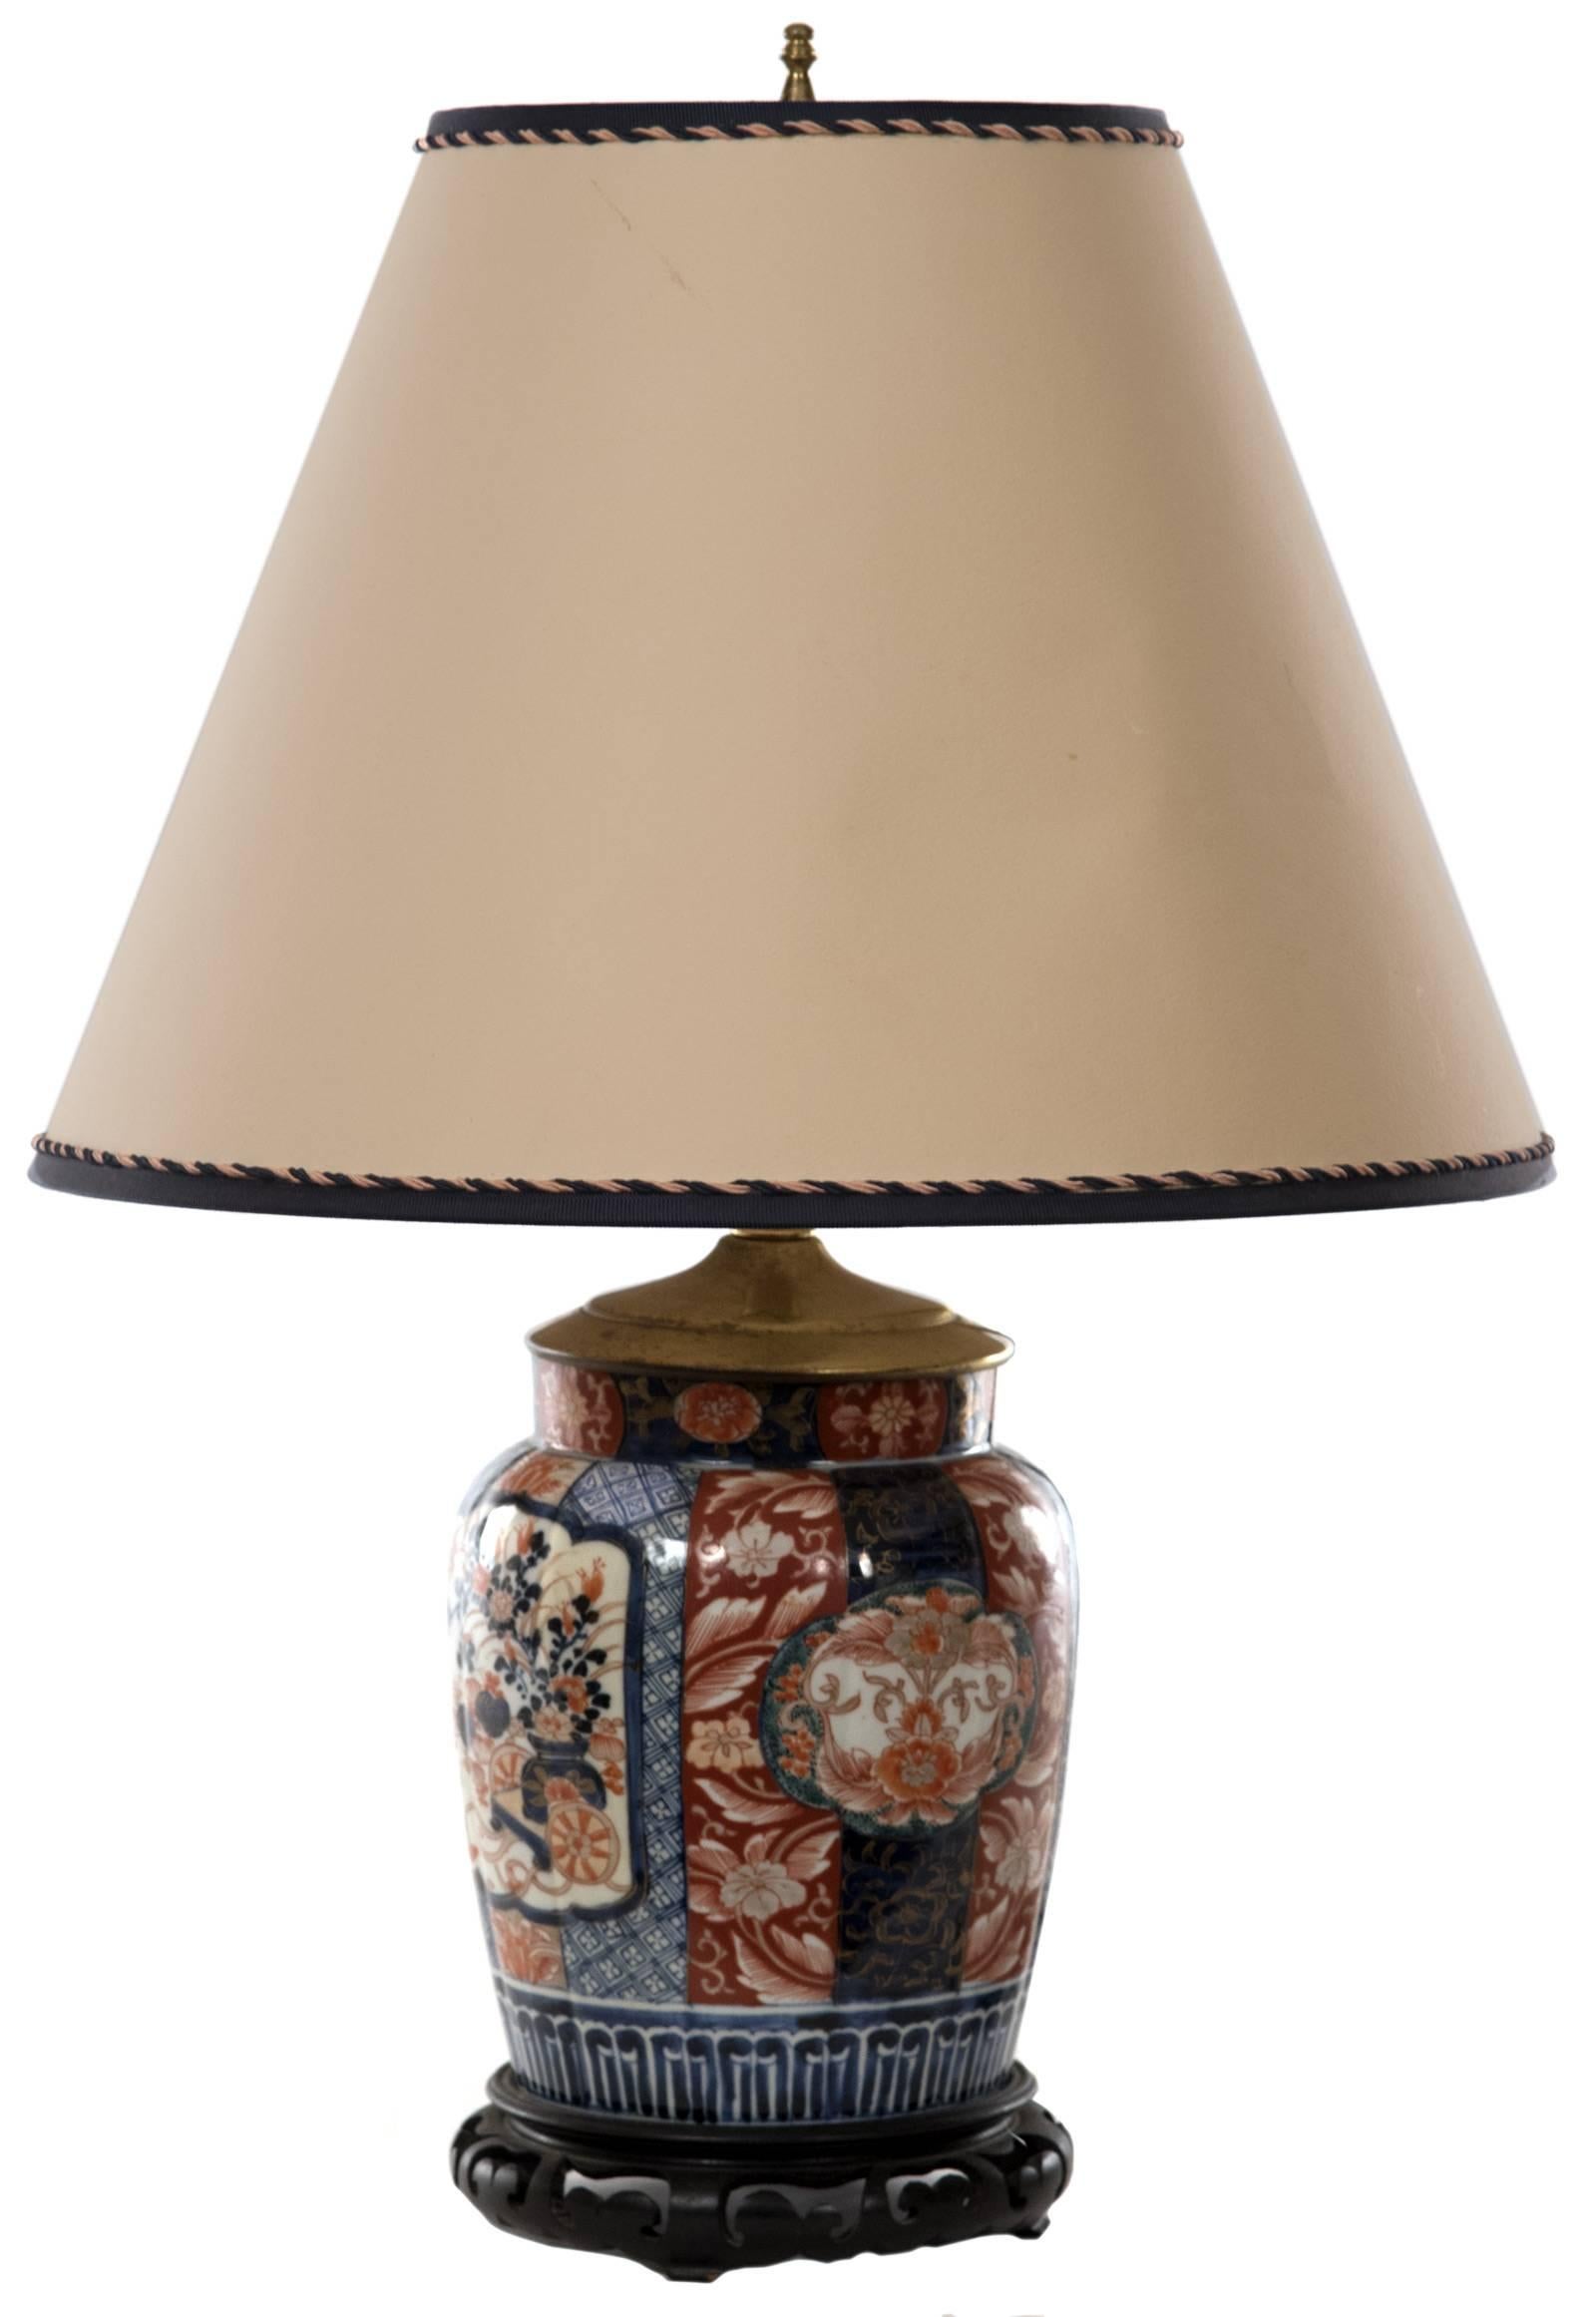 A 19th century Japanese Imari urn of ovoid form on pierced and carved wooden base fitted as a table lamp. The cylindrical neck is decorated with a band of floral motifs on alternating blue and red grounds, surmounting the slightly rounded shouldered